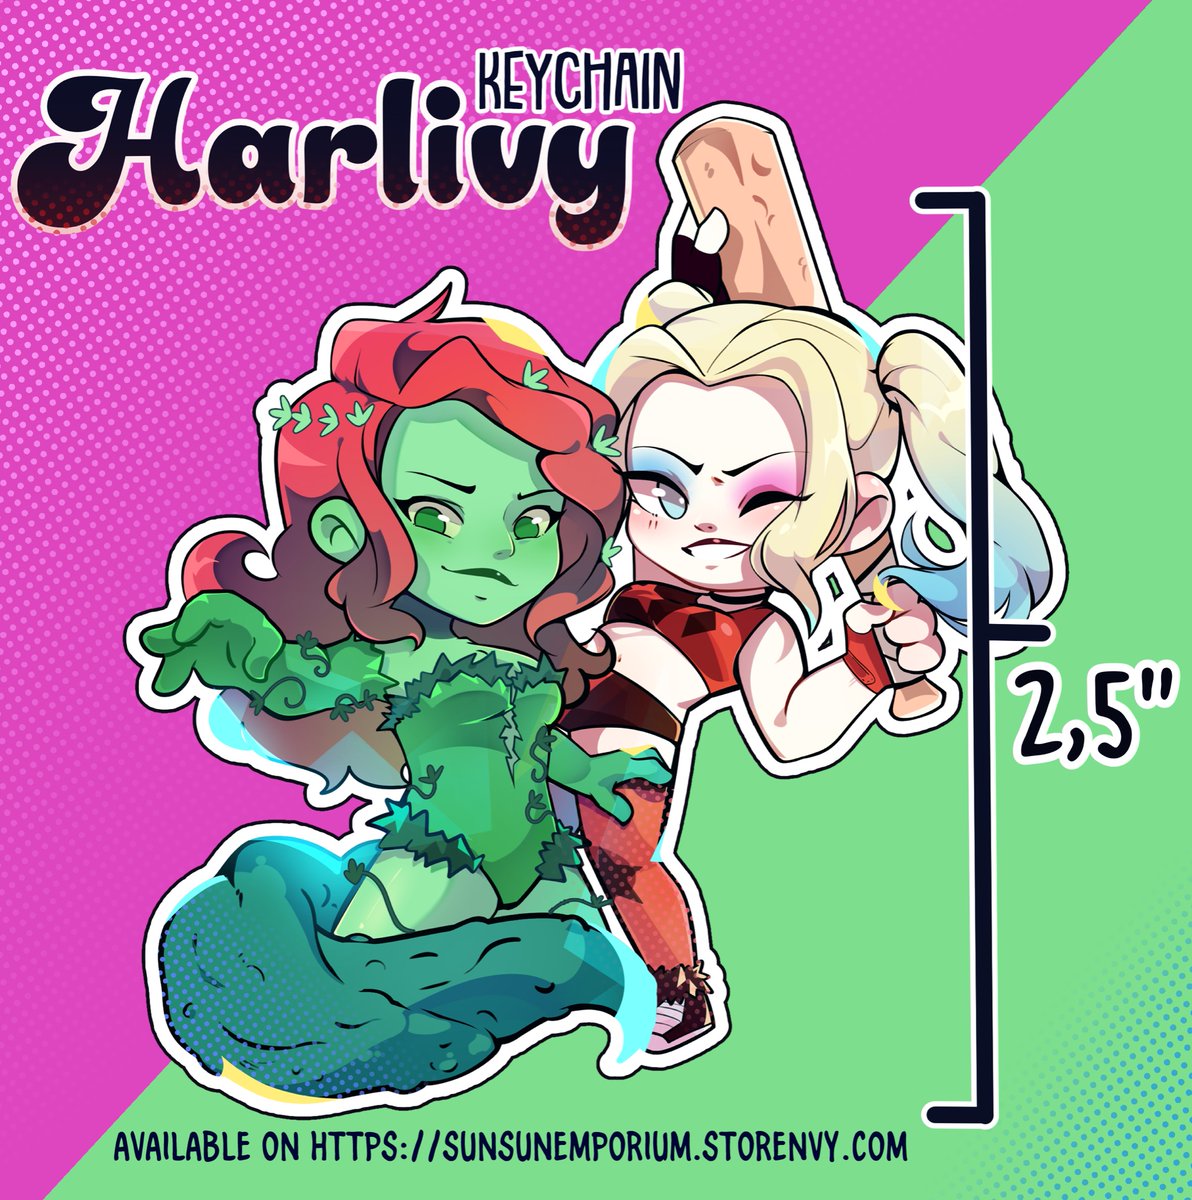 [Rt are very appreciated]

New keychain available for preorders in my store! check it out  here ⬇️⬇️⬇️
sunsunemporium.storenvy.com

#Harlivy #HarleyQuinn #PoisonIvy